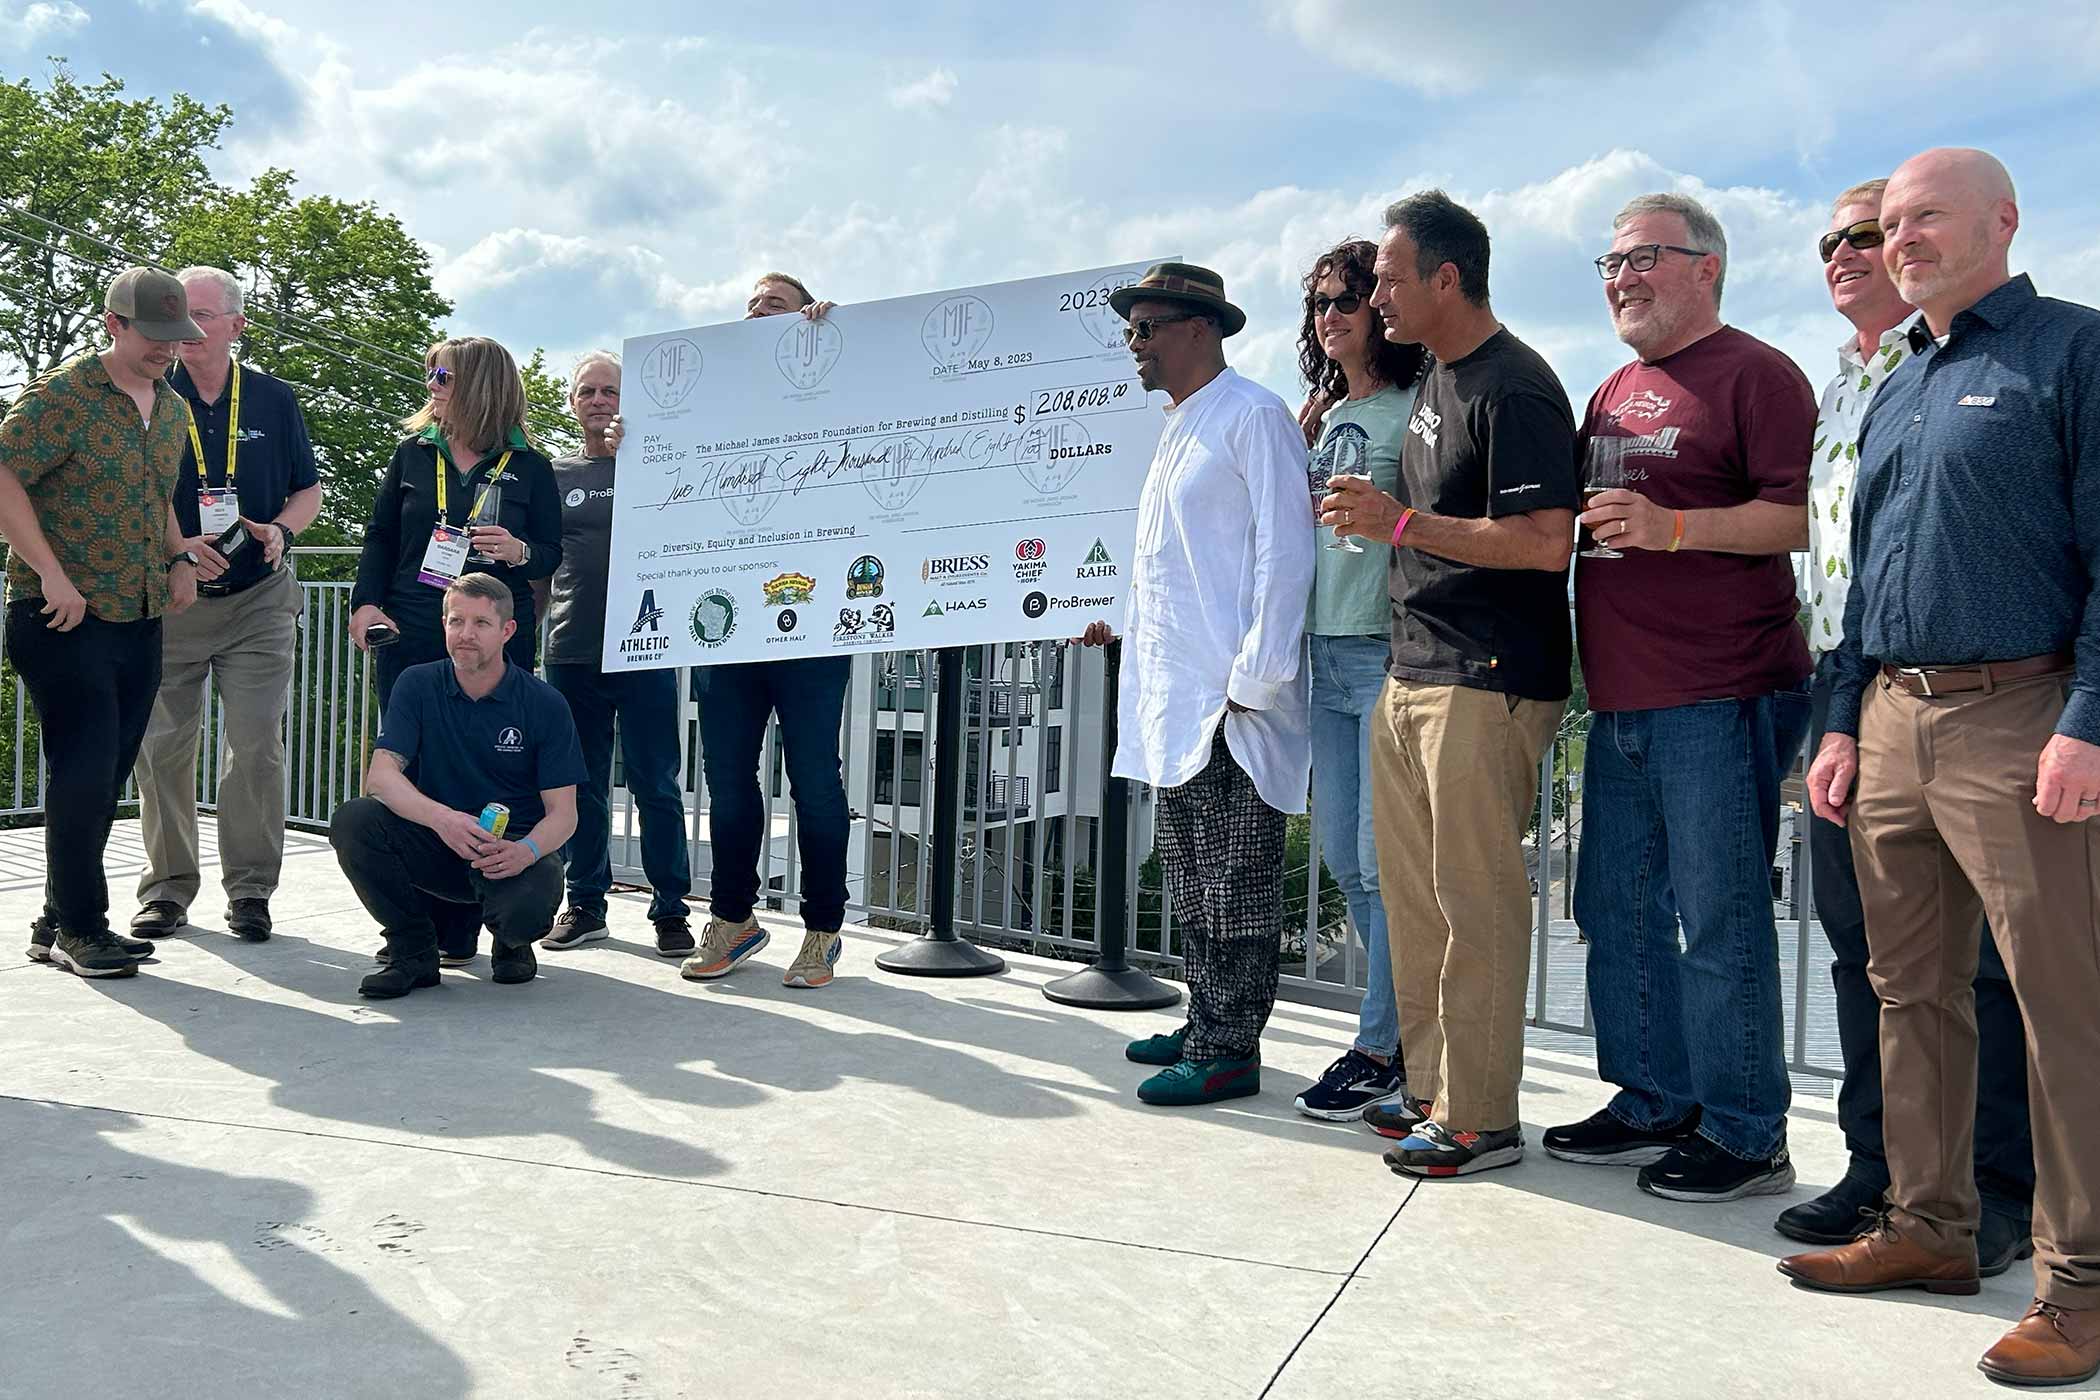 ProBrewer, Athletic, and More Raise $225k for Michael James Jackson Foundation